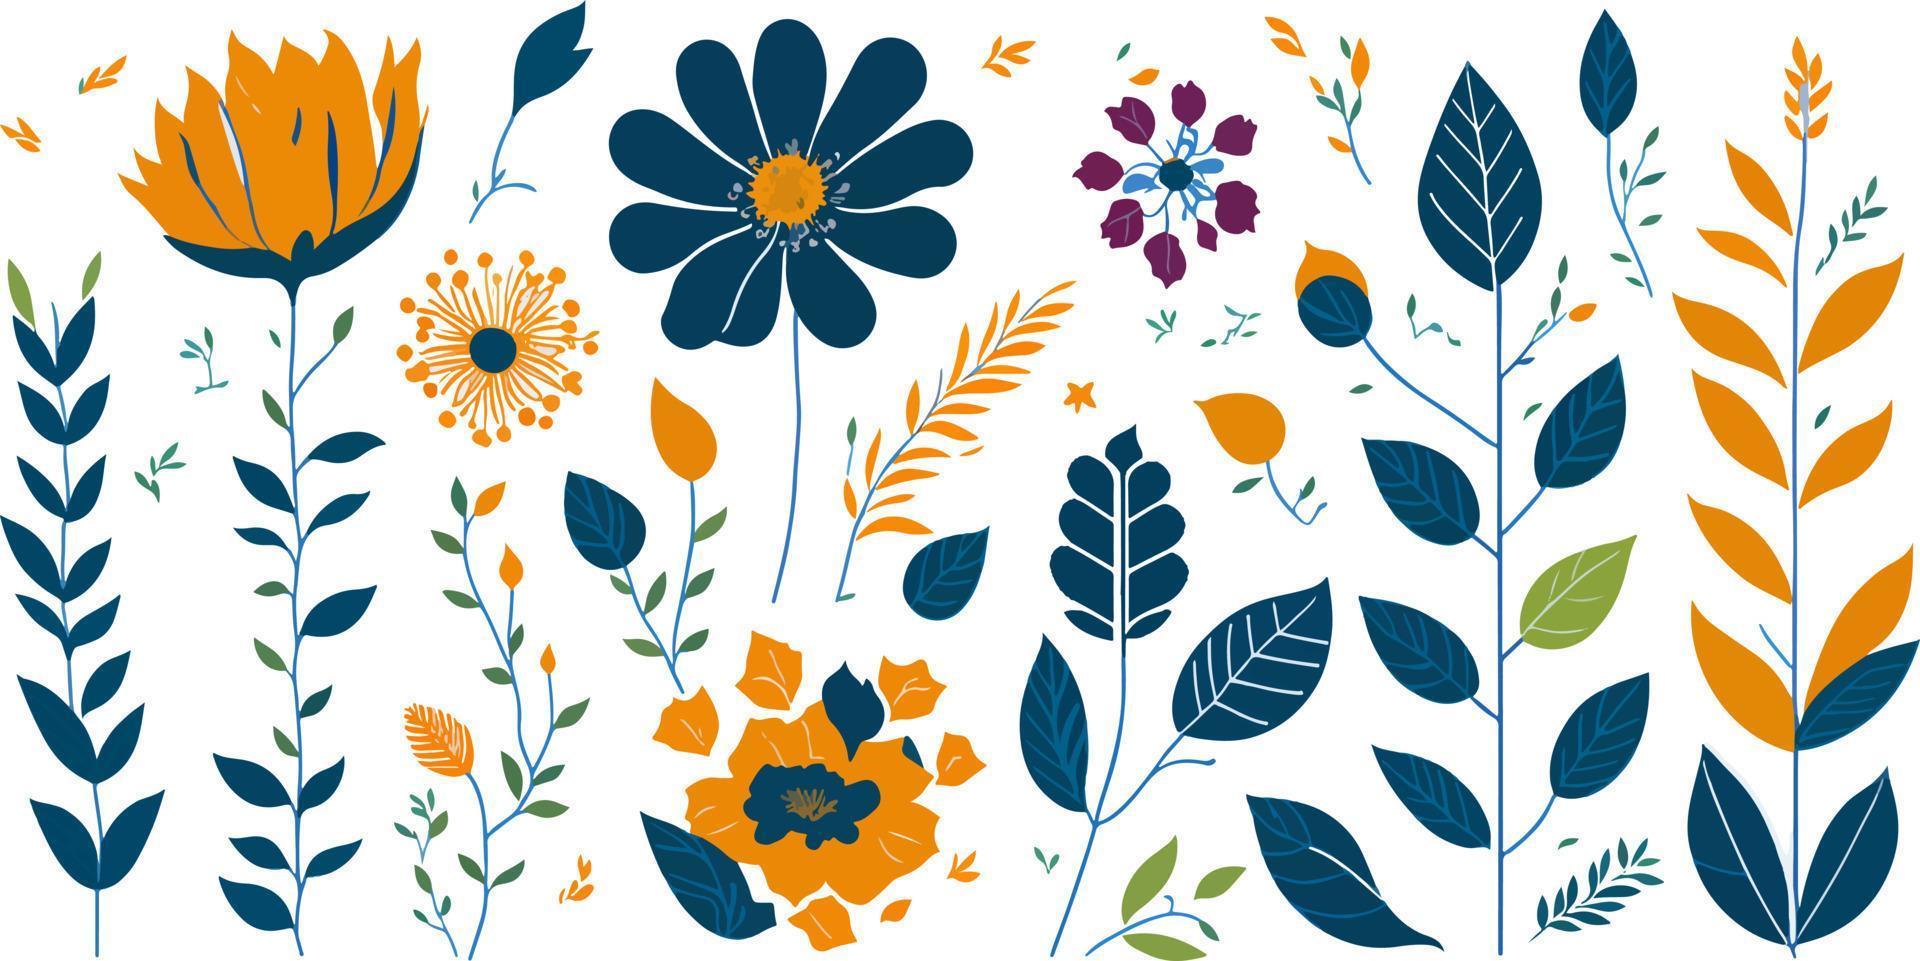 Create a Beautiful Floral Display with a Set of Hand-Drawn Blossom Vectors